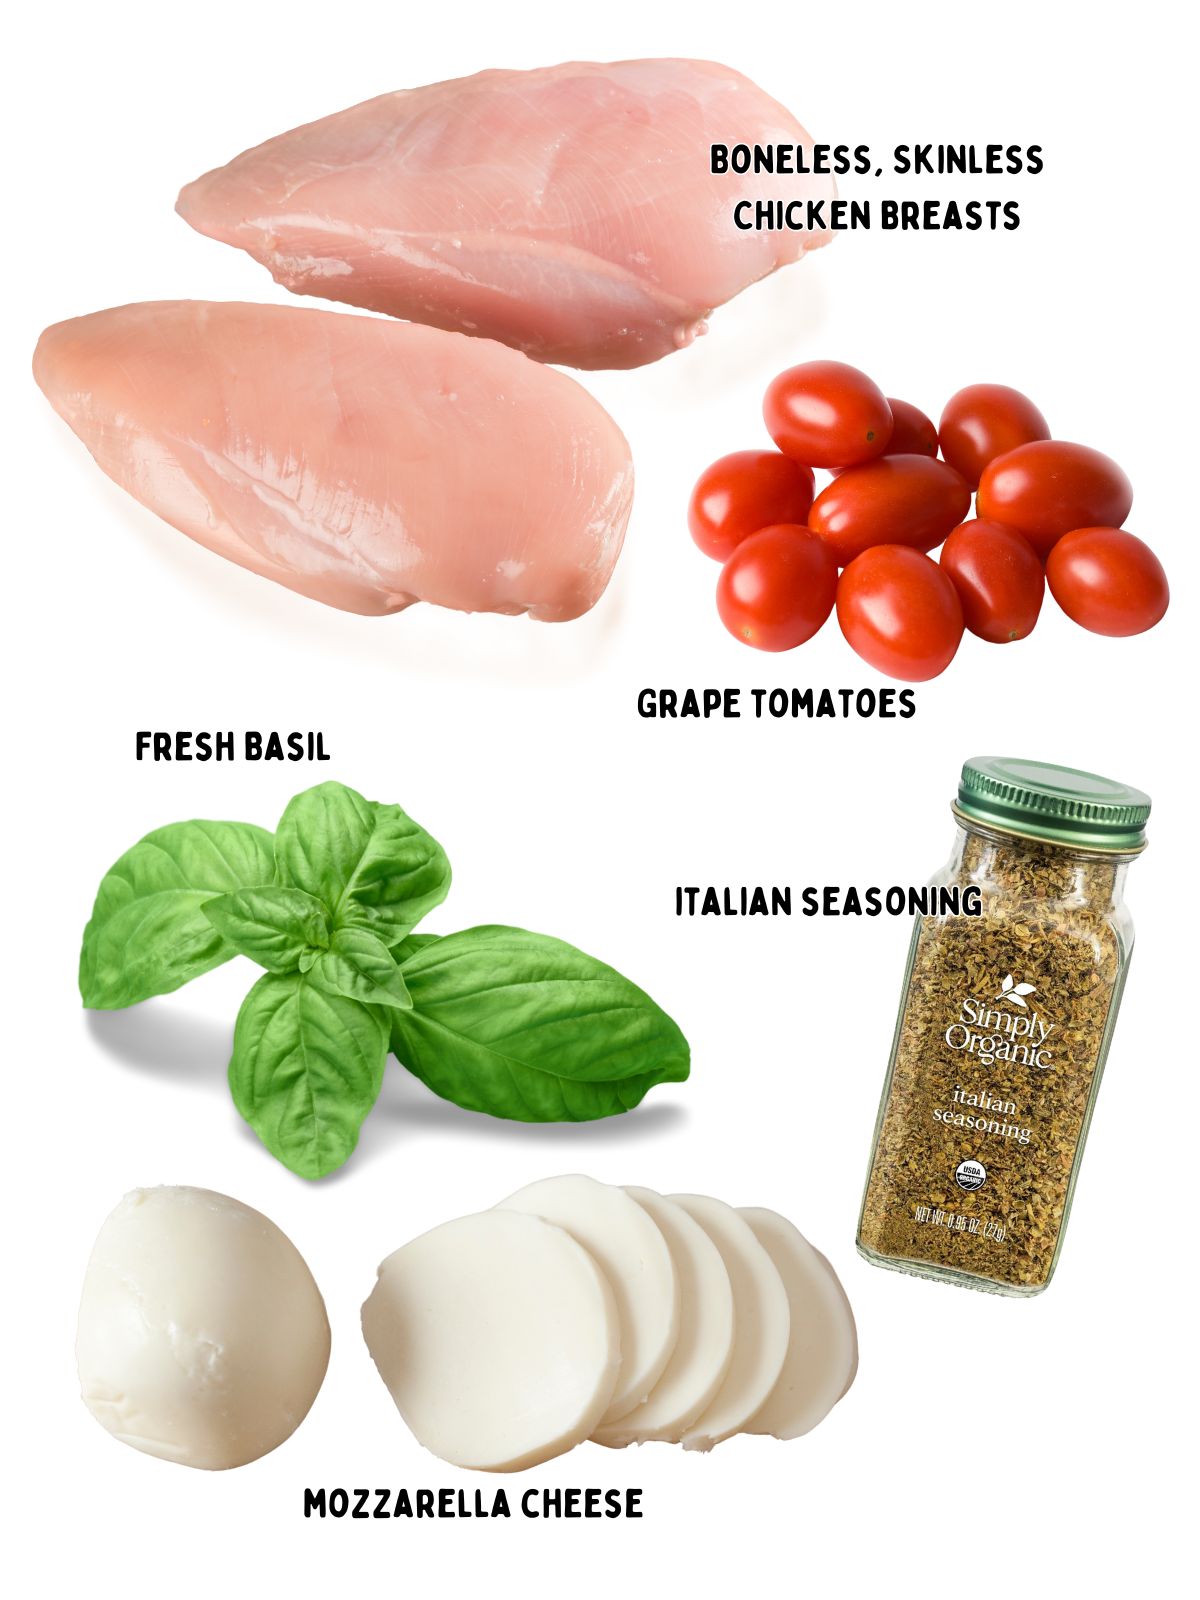 chicken breasts, tomatoes, mozzarella cheese, basil and seasoning mix in bottle.